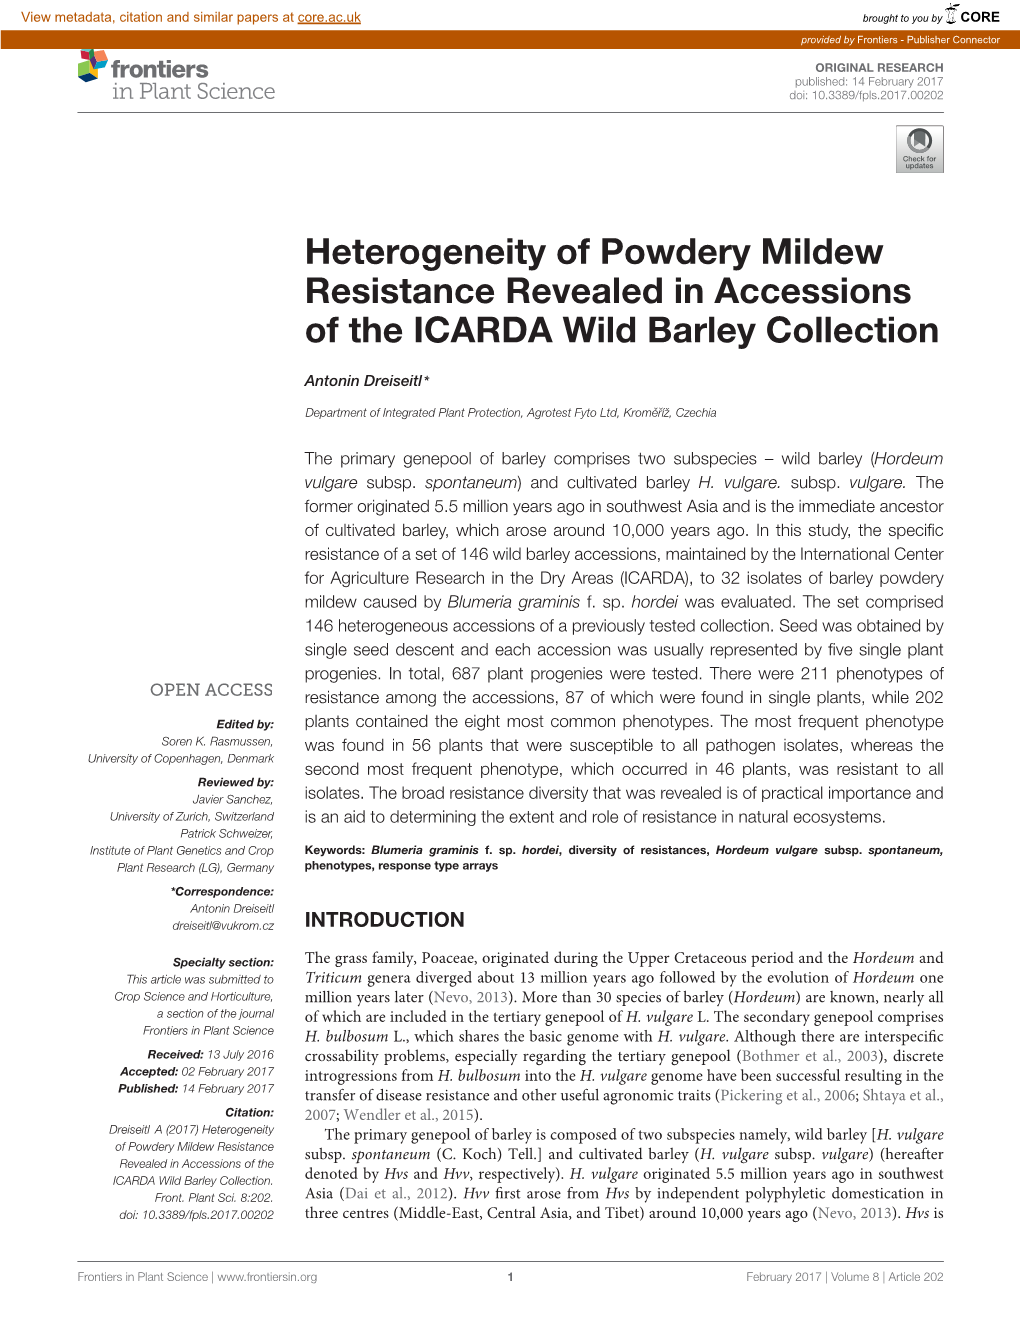 Heterogeneity of Powdery Mildew Resistance Revealed in Accessions of the ICARDA Wild Barley Collection